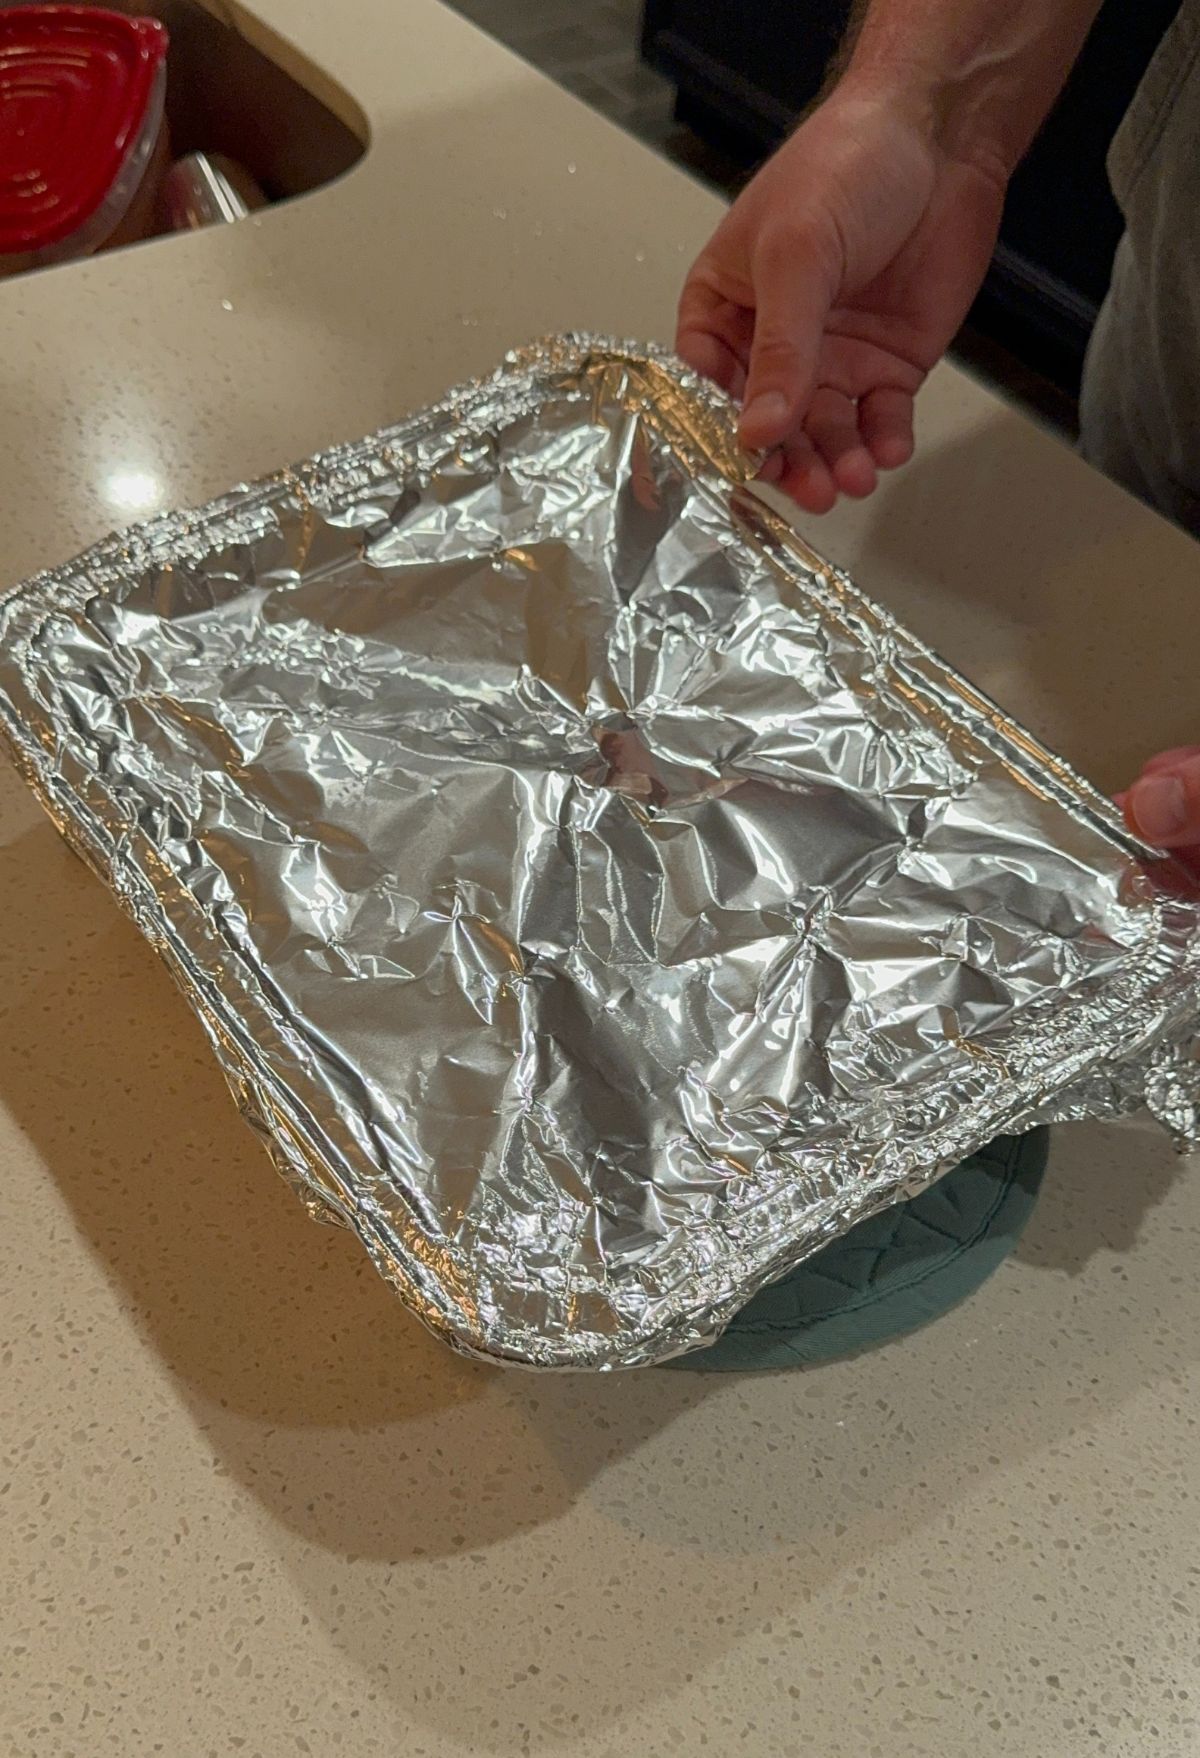 A person's hands holding a foil-covered tray over a kitchen counter.